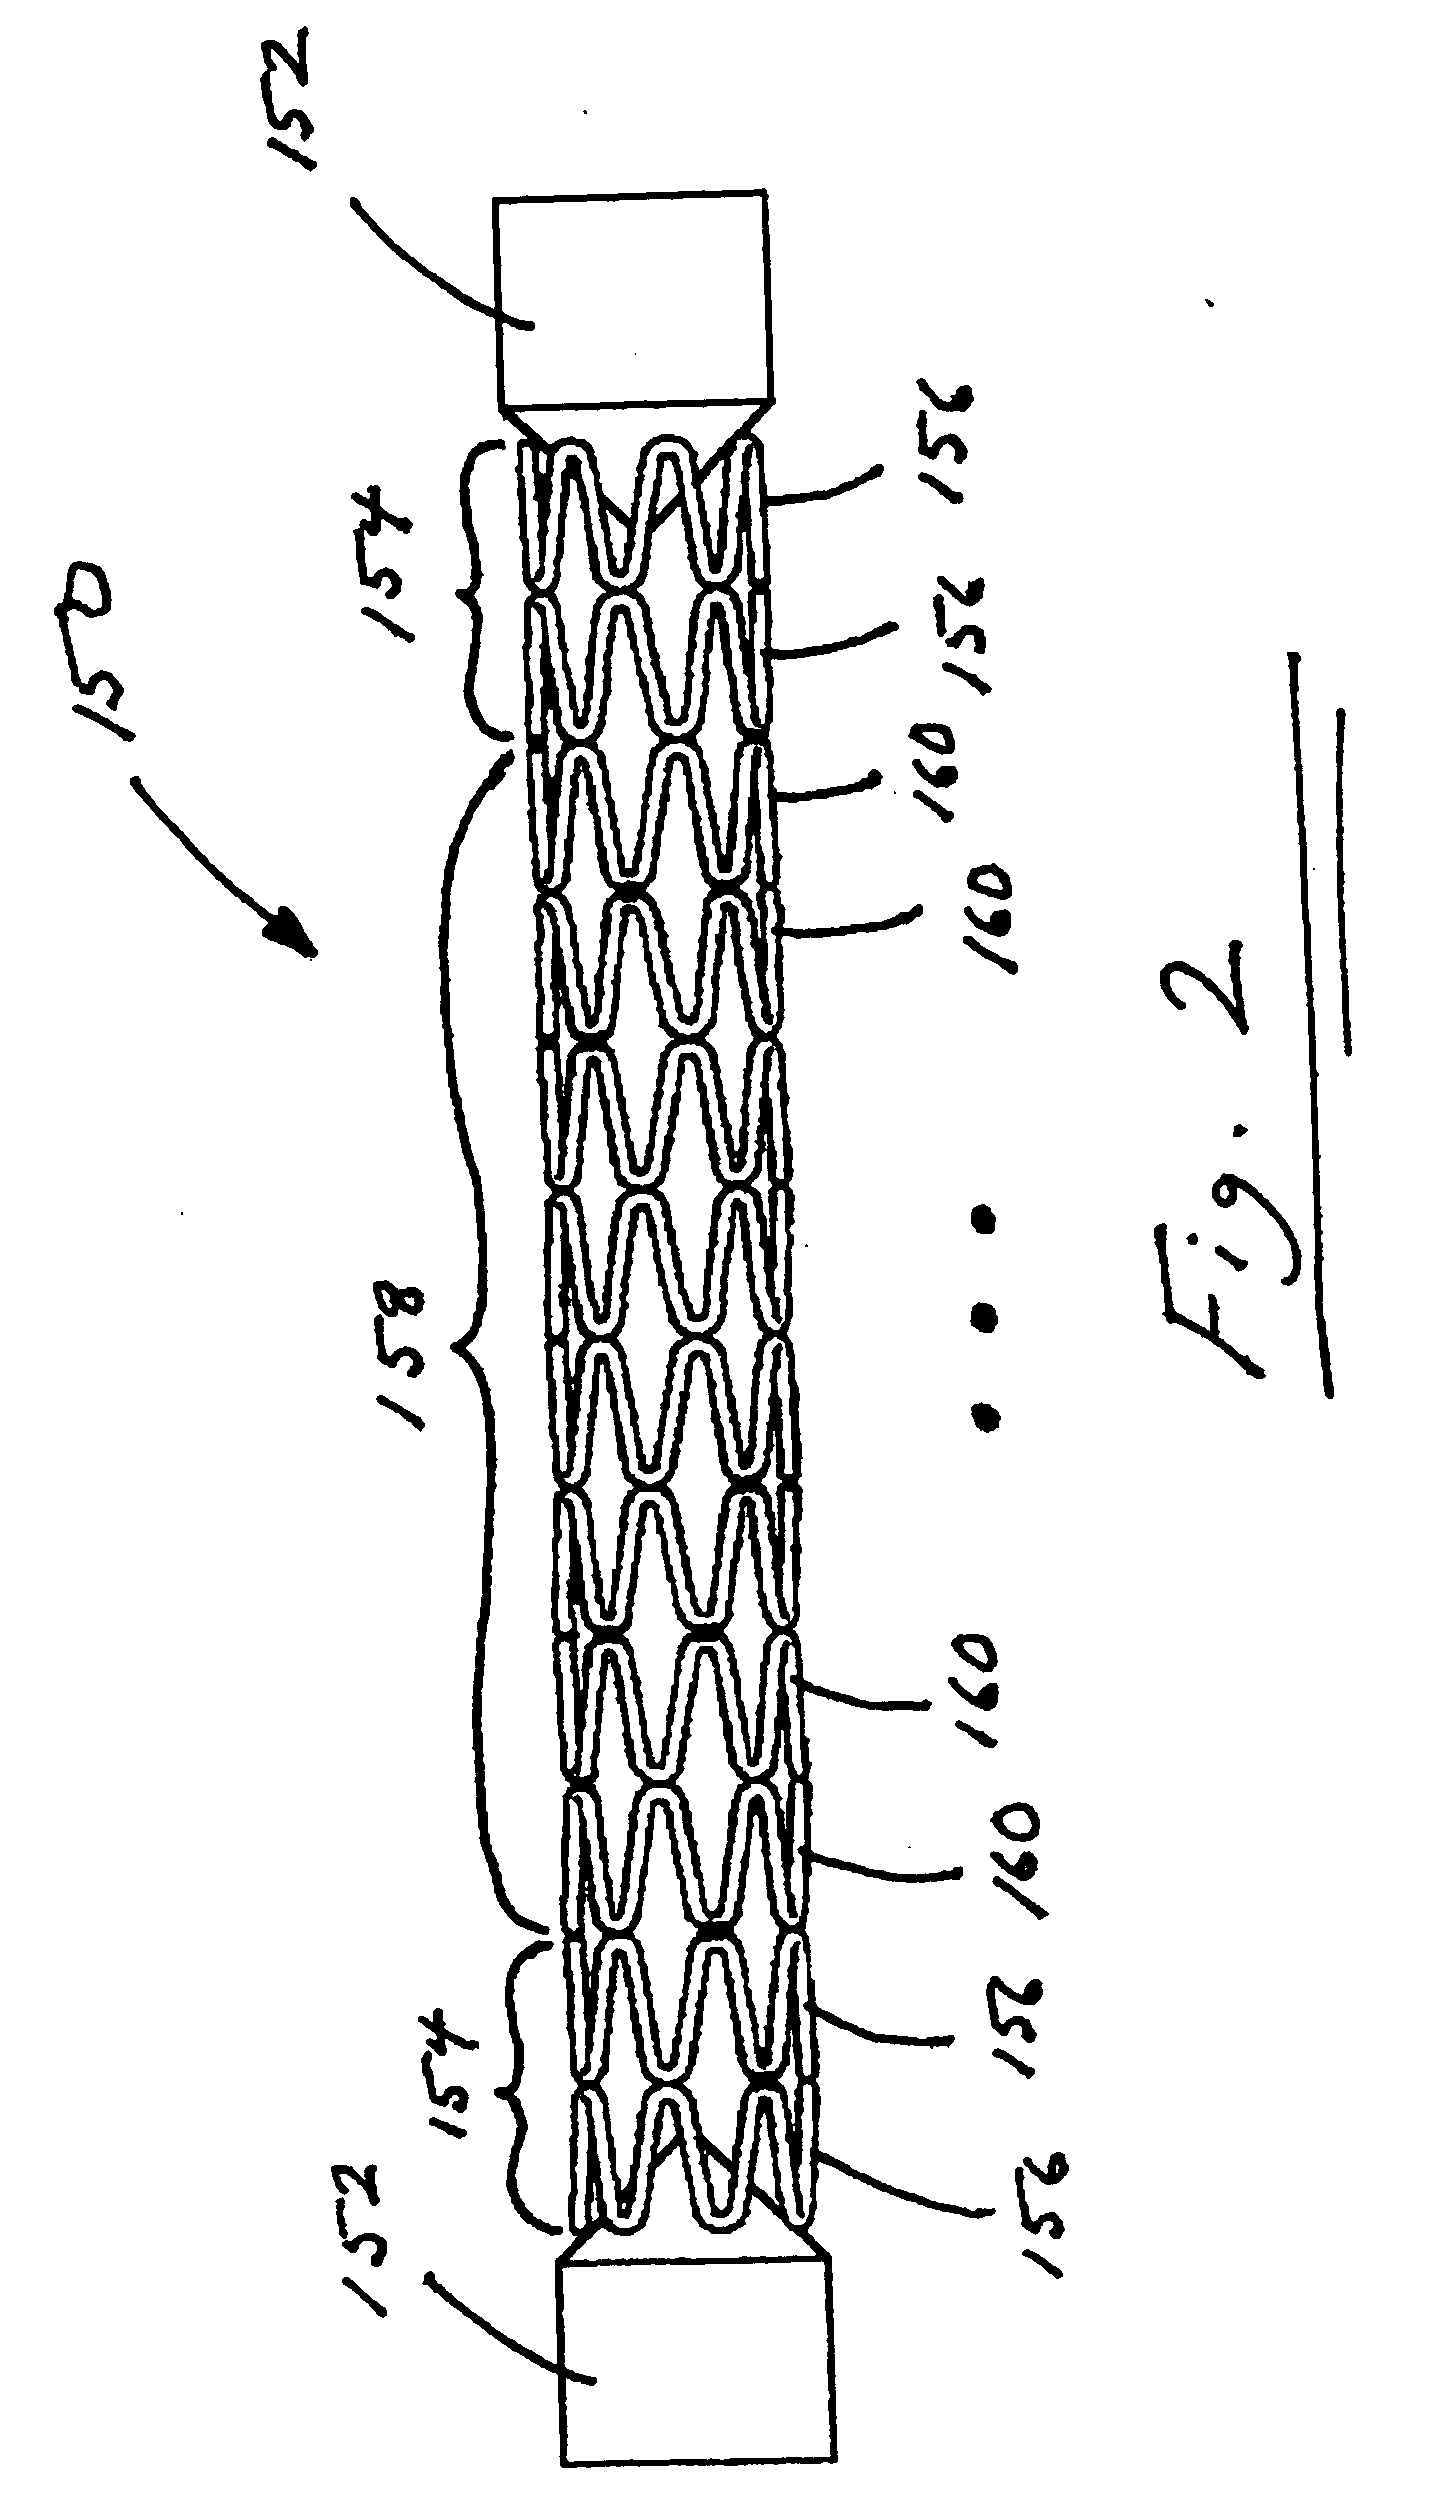 Stent with detachable ends